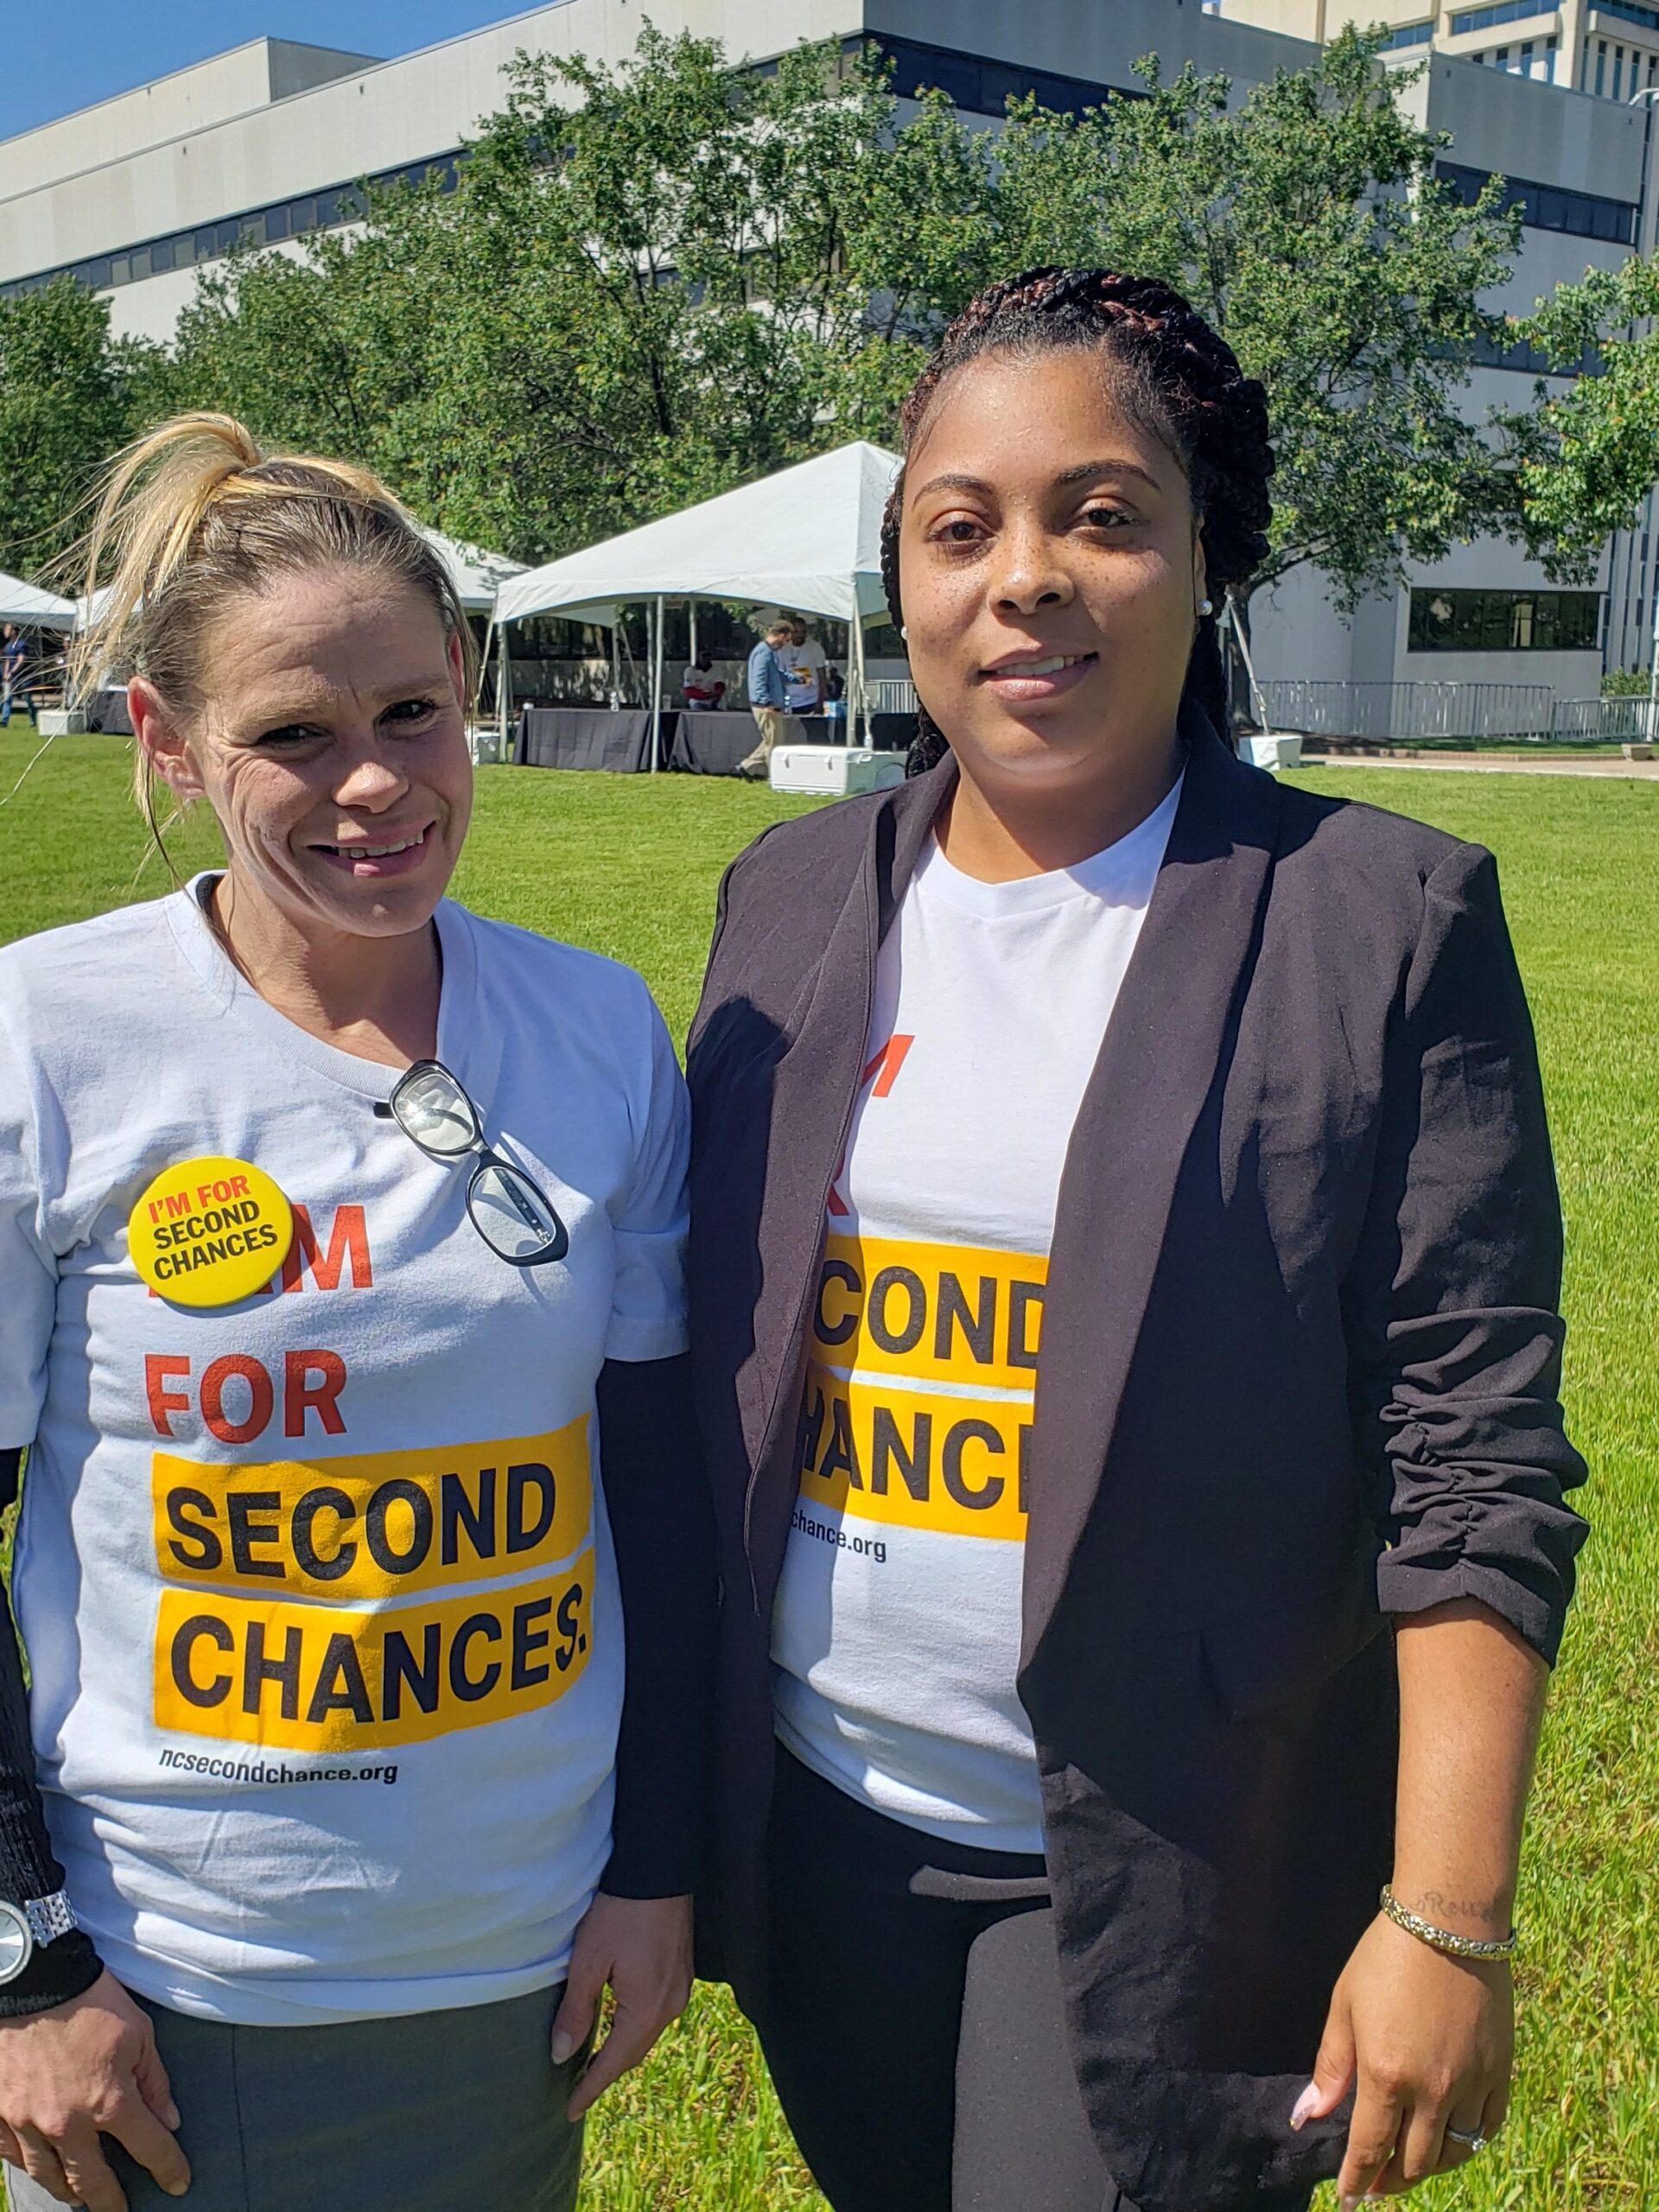 Pictured: Katie Anderson, Second Chance Alamance Project Manager (left) and Mona Evans, Family Reunification Advocate (right) standing before the NC Legislative Office Building on Second Chance Lobby Day.